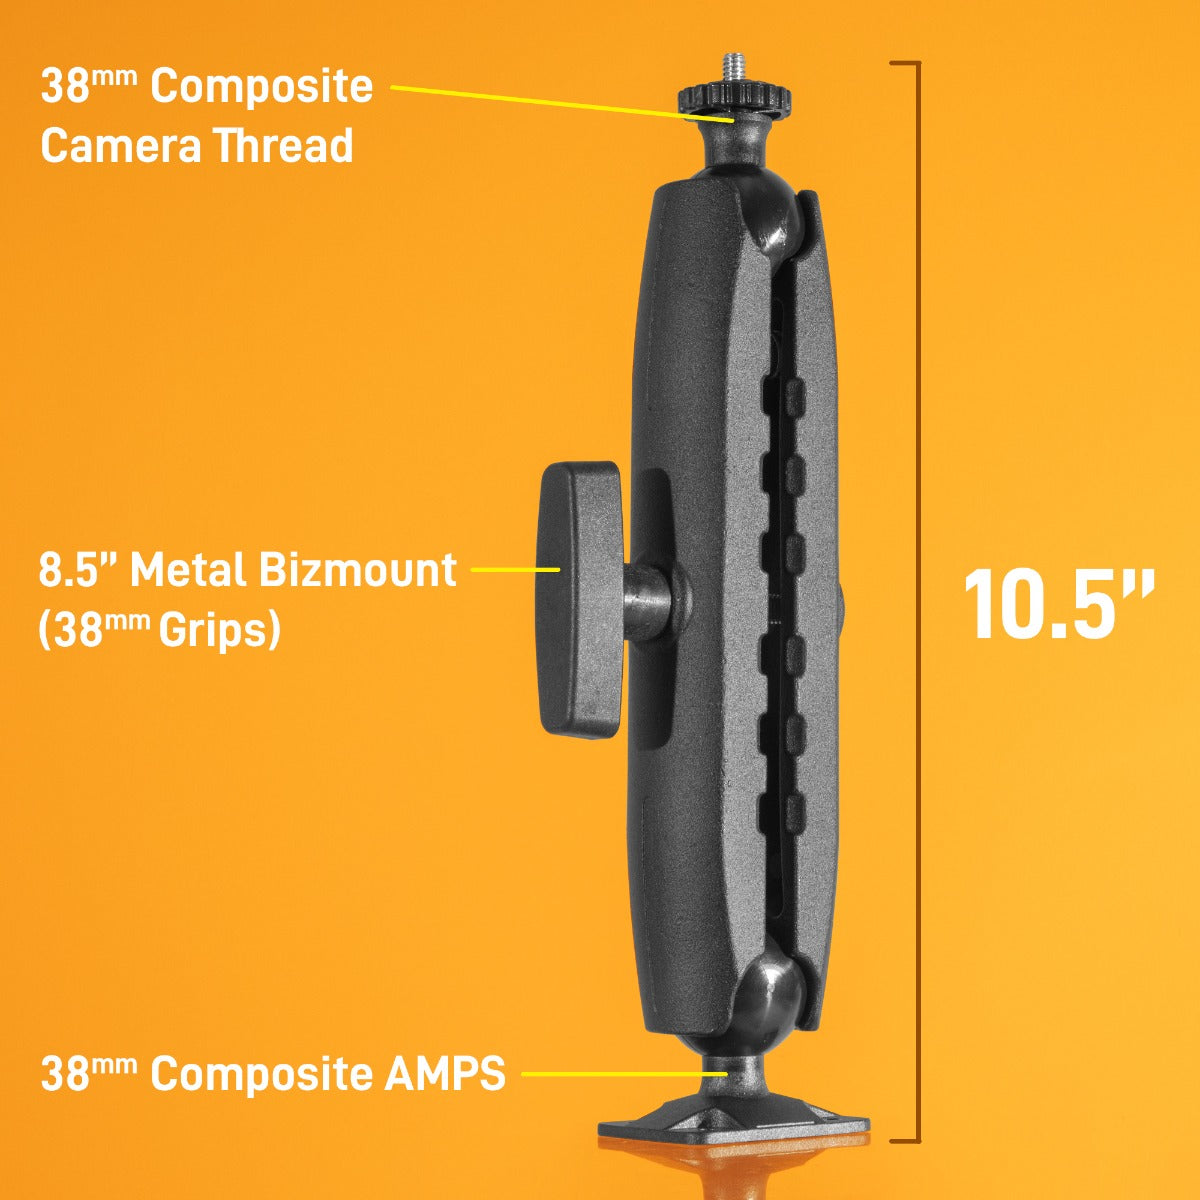 iBOLT™ 38mm / 1.5 inch Composite AMPS to ¼ 20” Composite Camera Screw Dual Ball Mount